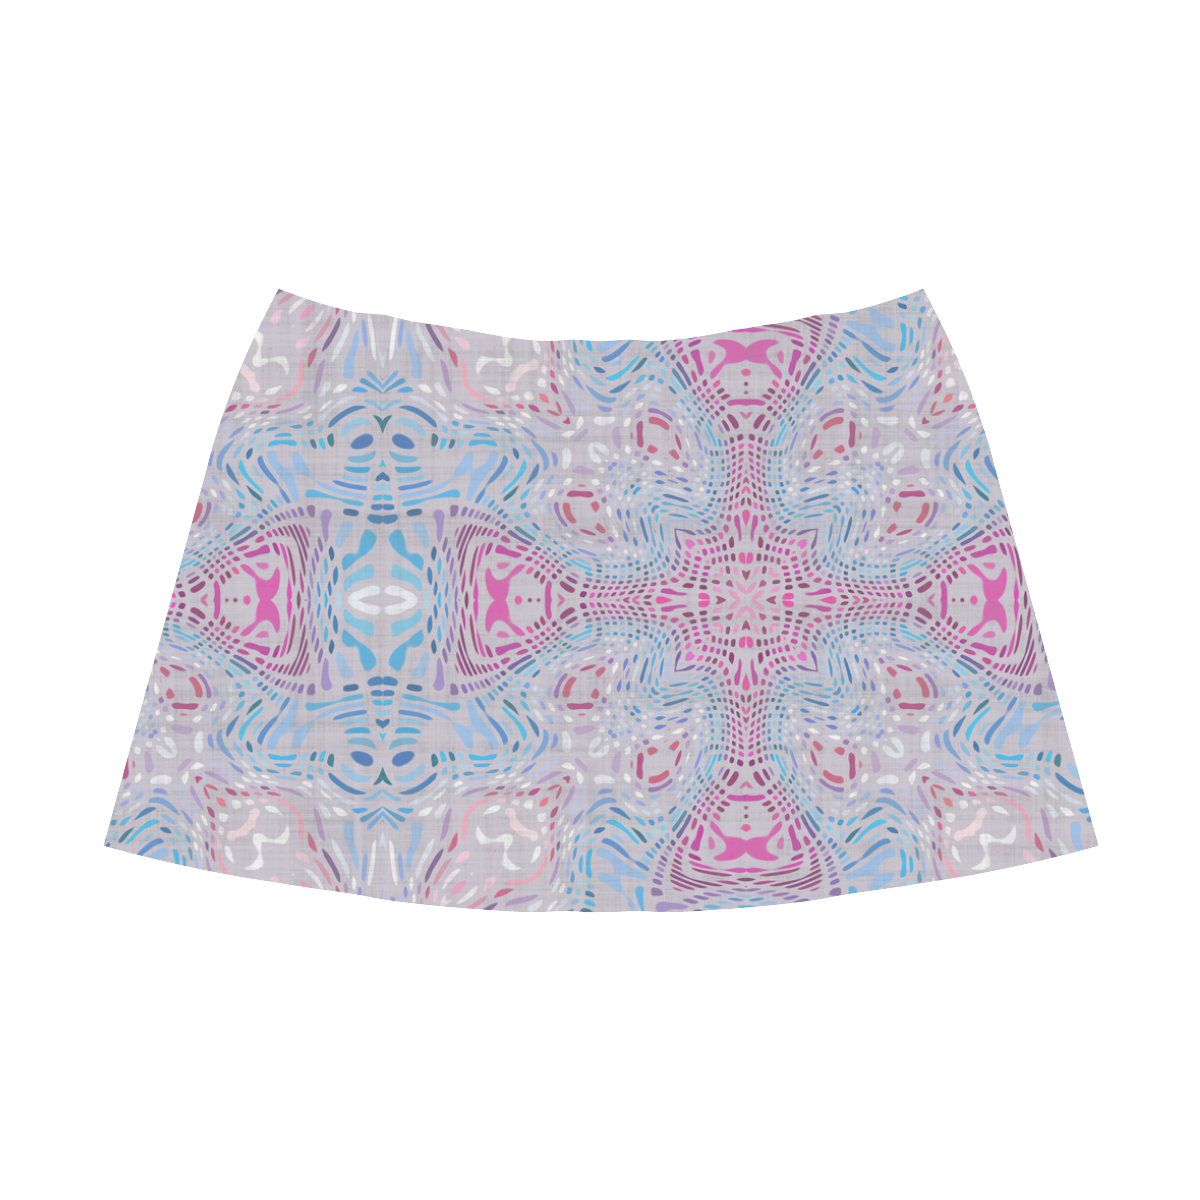 pink blue and white abstract Mnemosyne Women's Crepe Skirt (Model D16)